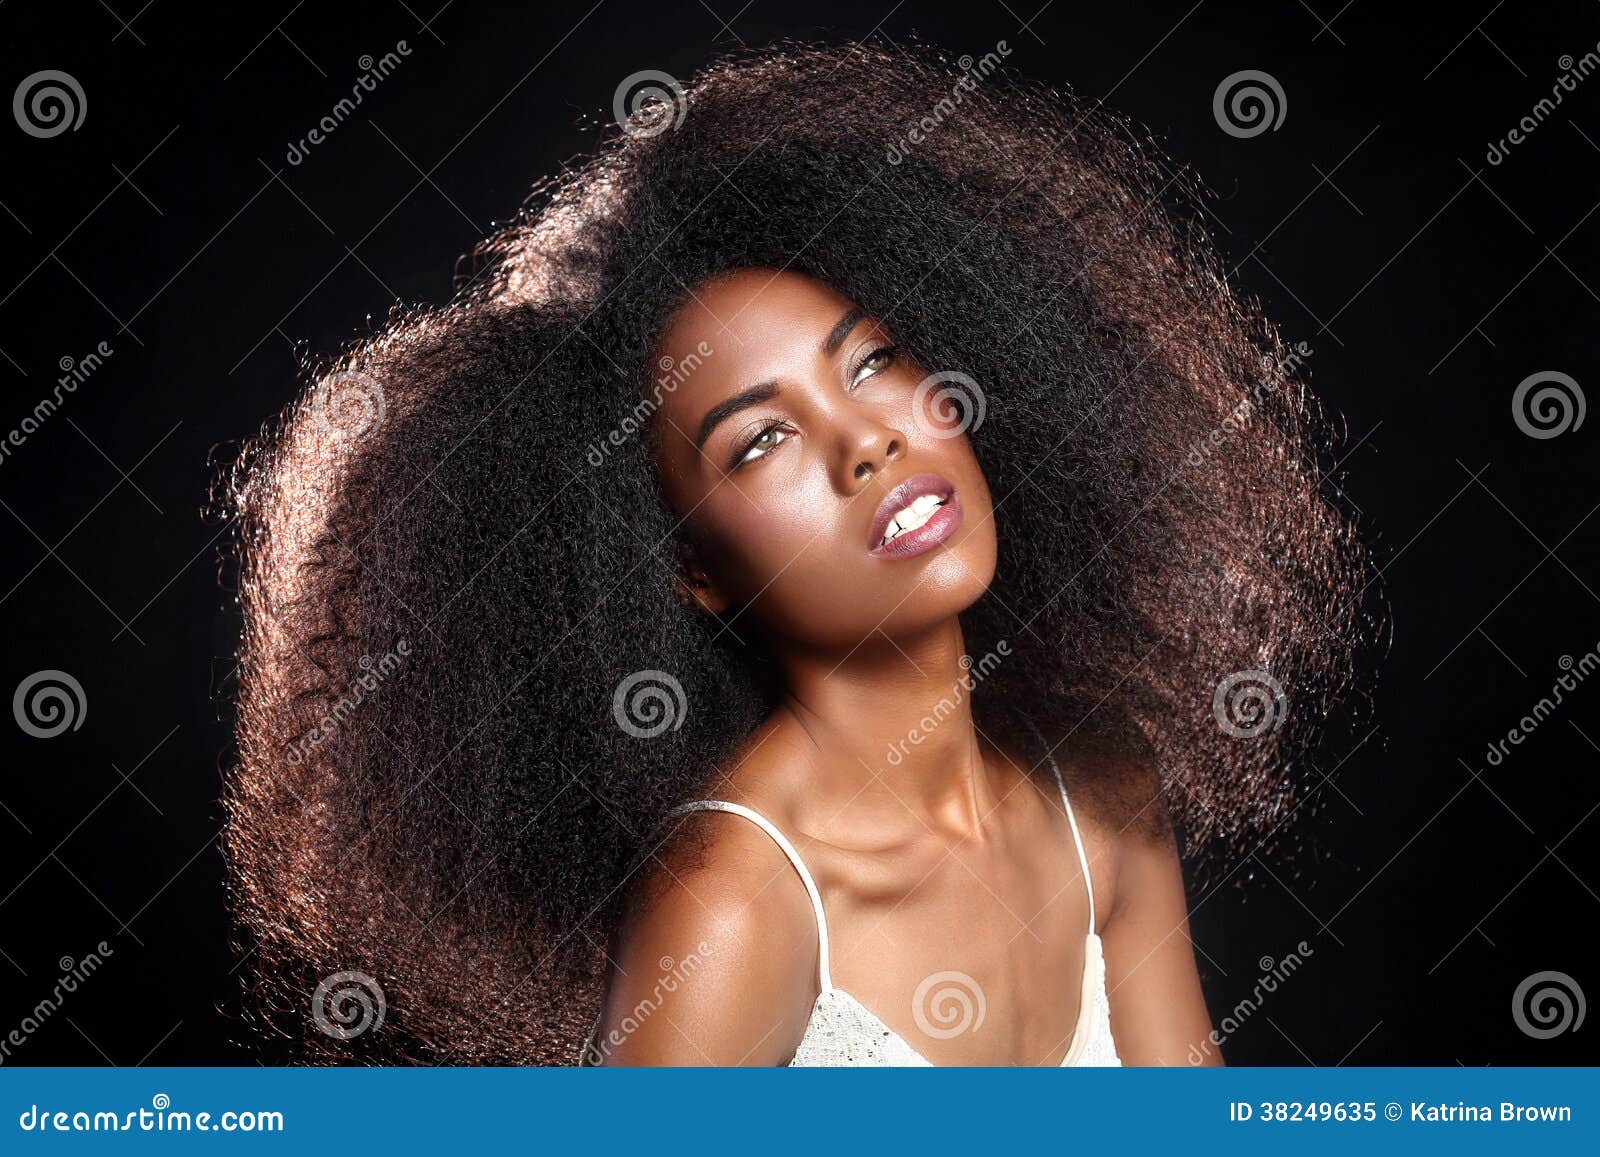 Girl afro singer with black People you